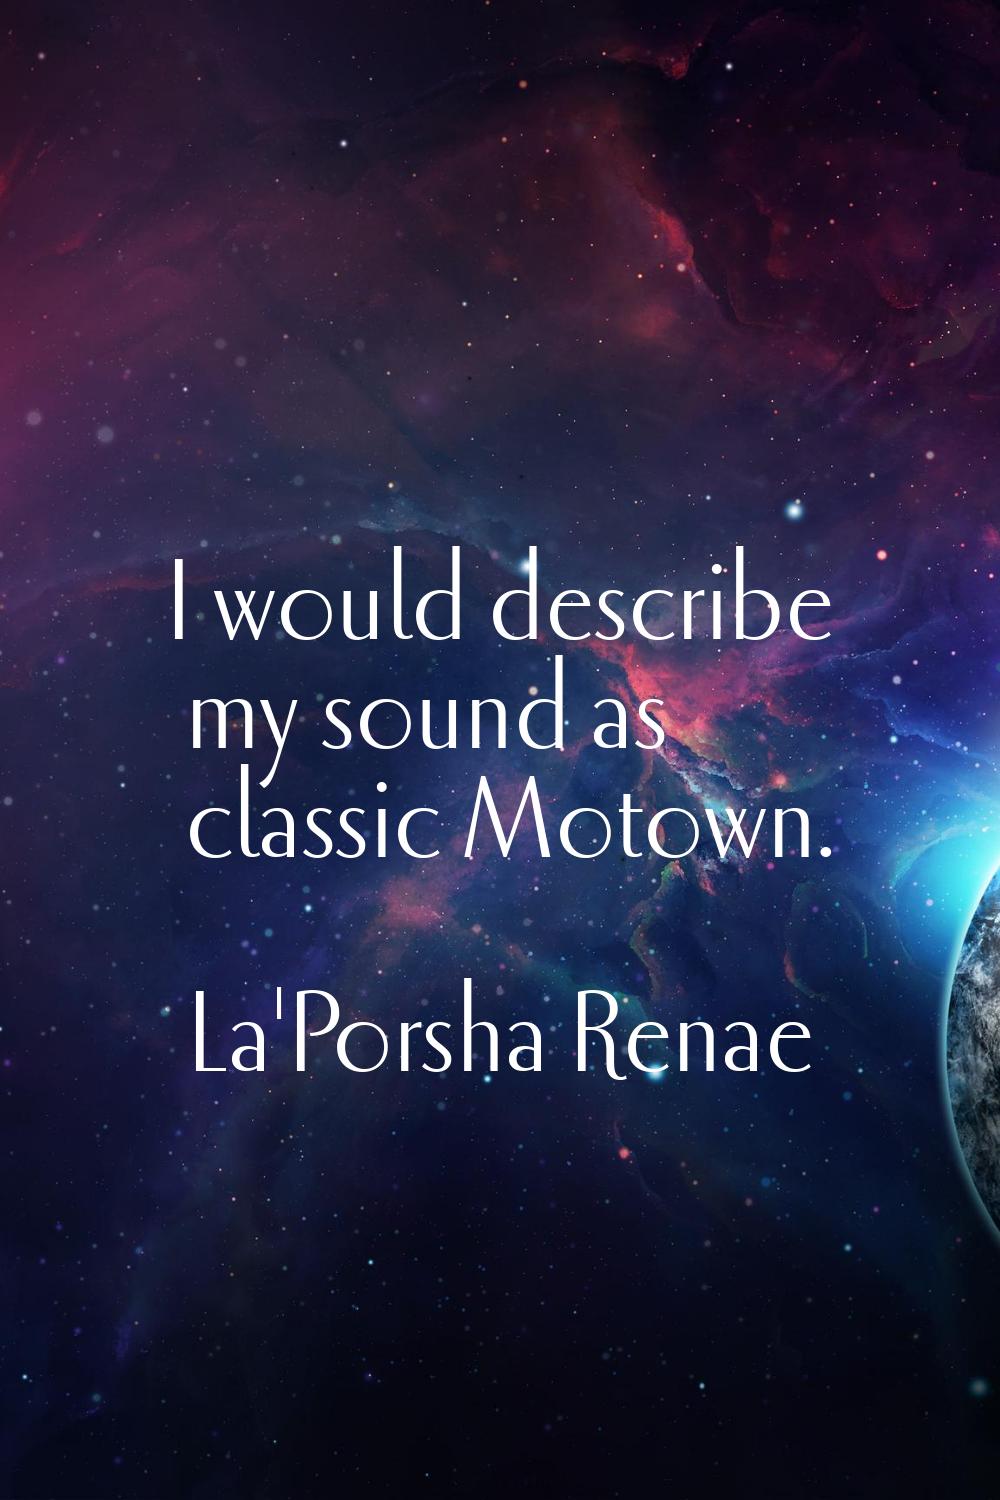 I would describe my sound as classic Motown.